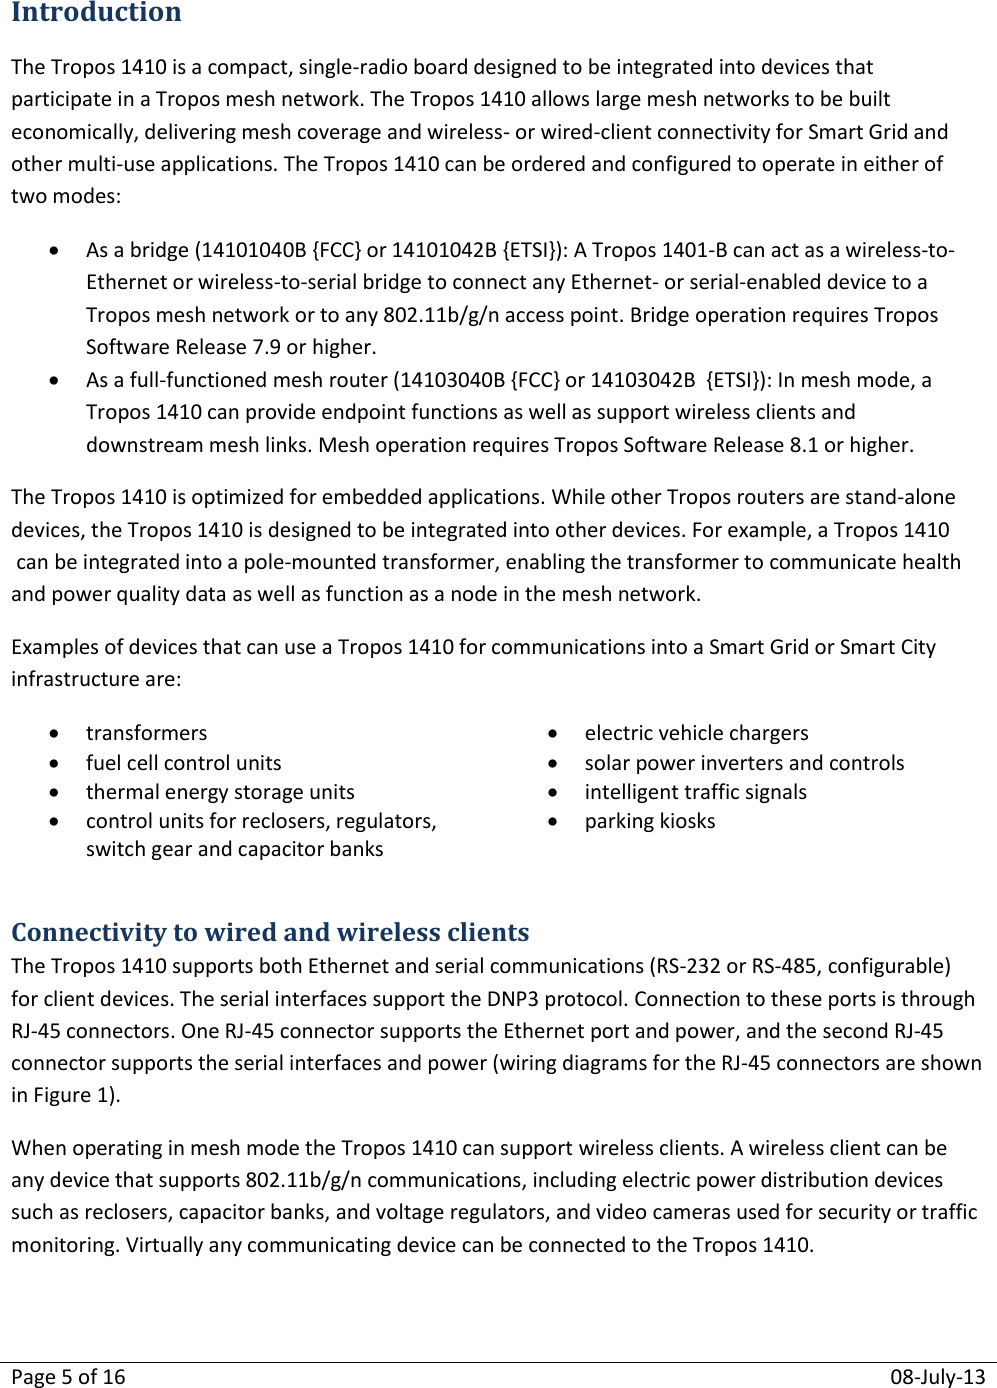 Page 5 of 16  08-July-13  Introduction The Tropos 1410 is a compact, single-radio board designed to be integrated into devices that participate in a Tropos mesh network. The Tropos 1410 allows large mesh networks to be built economically, delivering mesh coverage and wireless- or wired-client connectivity for Smart Grid and other multi-use applications. The Tropos 1410 can be ordered and configured to operate in either of two modes:  As a bridge (14101040B {FCC} or 14101042B {ETSI}): A Tropos 1401-B can act as a wireless-to-Ethernet or wireless-to-serial bridge to connect any Ethernet- or serial-enabled device to a Tropos mesh network or to any 802.11b/g/n access point. Bridge operation requires Tropos Software Release 7.9 or higher.  As a full-functioned mesh router (14103040B {FCC} or 14103042B  {ETSI}): In mesh mode, a Tropos 1410 can provide endpoint functions as well as support wireless clients and downstream mesh links. Mesh operation requires Tropos Software Release 8.1 or higher. The Tropos 1410 is optimized for embedded applications. While other Tropos routers are stand-alone devices, the Tropos 1410 is designed to be integrated into other devices. For example, a Tropos 1410 can be integrated into a pole-mounted transformer, enabling the transformer to communicate health and power quality data as well as function as a node in the mesh network. Examples of devices that can use a Tropos 1410 for communications into a Smart Grid or Smart City infrastructure are:  transformers  electric vehicle chargers  fuel cell control units  solar power inverters and controls  thermal energy storage units  intelligent traffic signals  control units for reclosers, regulators, switch gear and capacitor banks  parking kiosks  Connectivity to wired and wireless clients The Tropos 1410 supports both Ethernet and serial communications (RS-232 or RS-485, configurable) for client devices. The serial interfaces support the DNP3 protocol. Connection to these ports is through RJ-45 connectors. One RJ-45 connector supports the Ethernet port and power, and the second RJ-45 connector supports the serial interfaces and power (wiring diagrams for the RJ-45 connectors are shown in Figure 1). When operating in mesh mode the Tropos 1410 can support wireless clients. A wireless client can be any device that supports 802.11b/g/n communications, including electric power distribution devices such as reclosers, capacitor banks, and voltage regulators, and video cameras used for security or traffic monitoring. Virtually any communicating device can be connected to the Tropos 1410.     